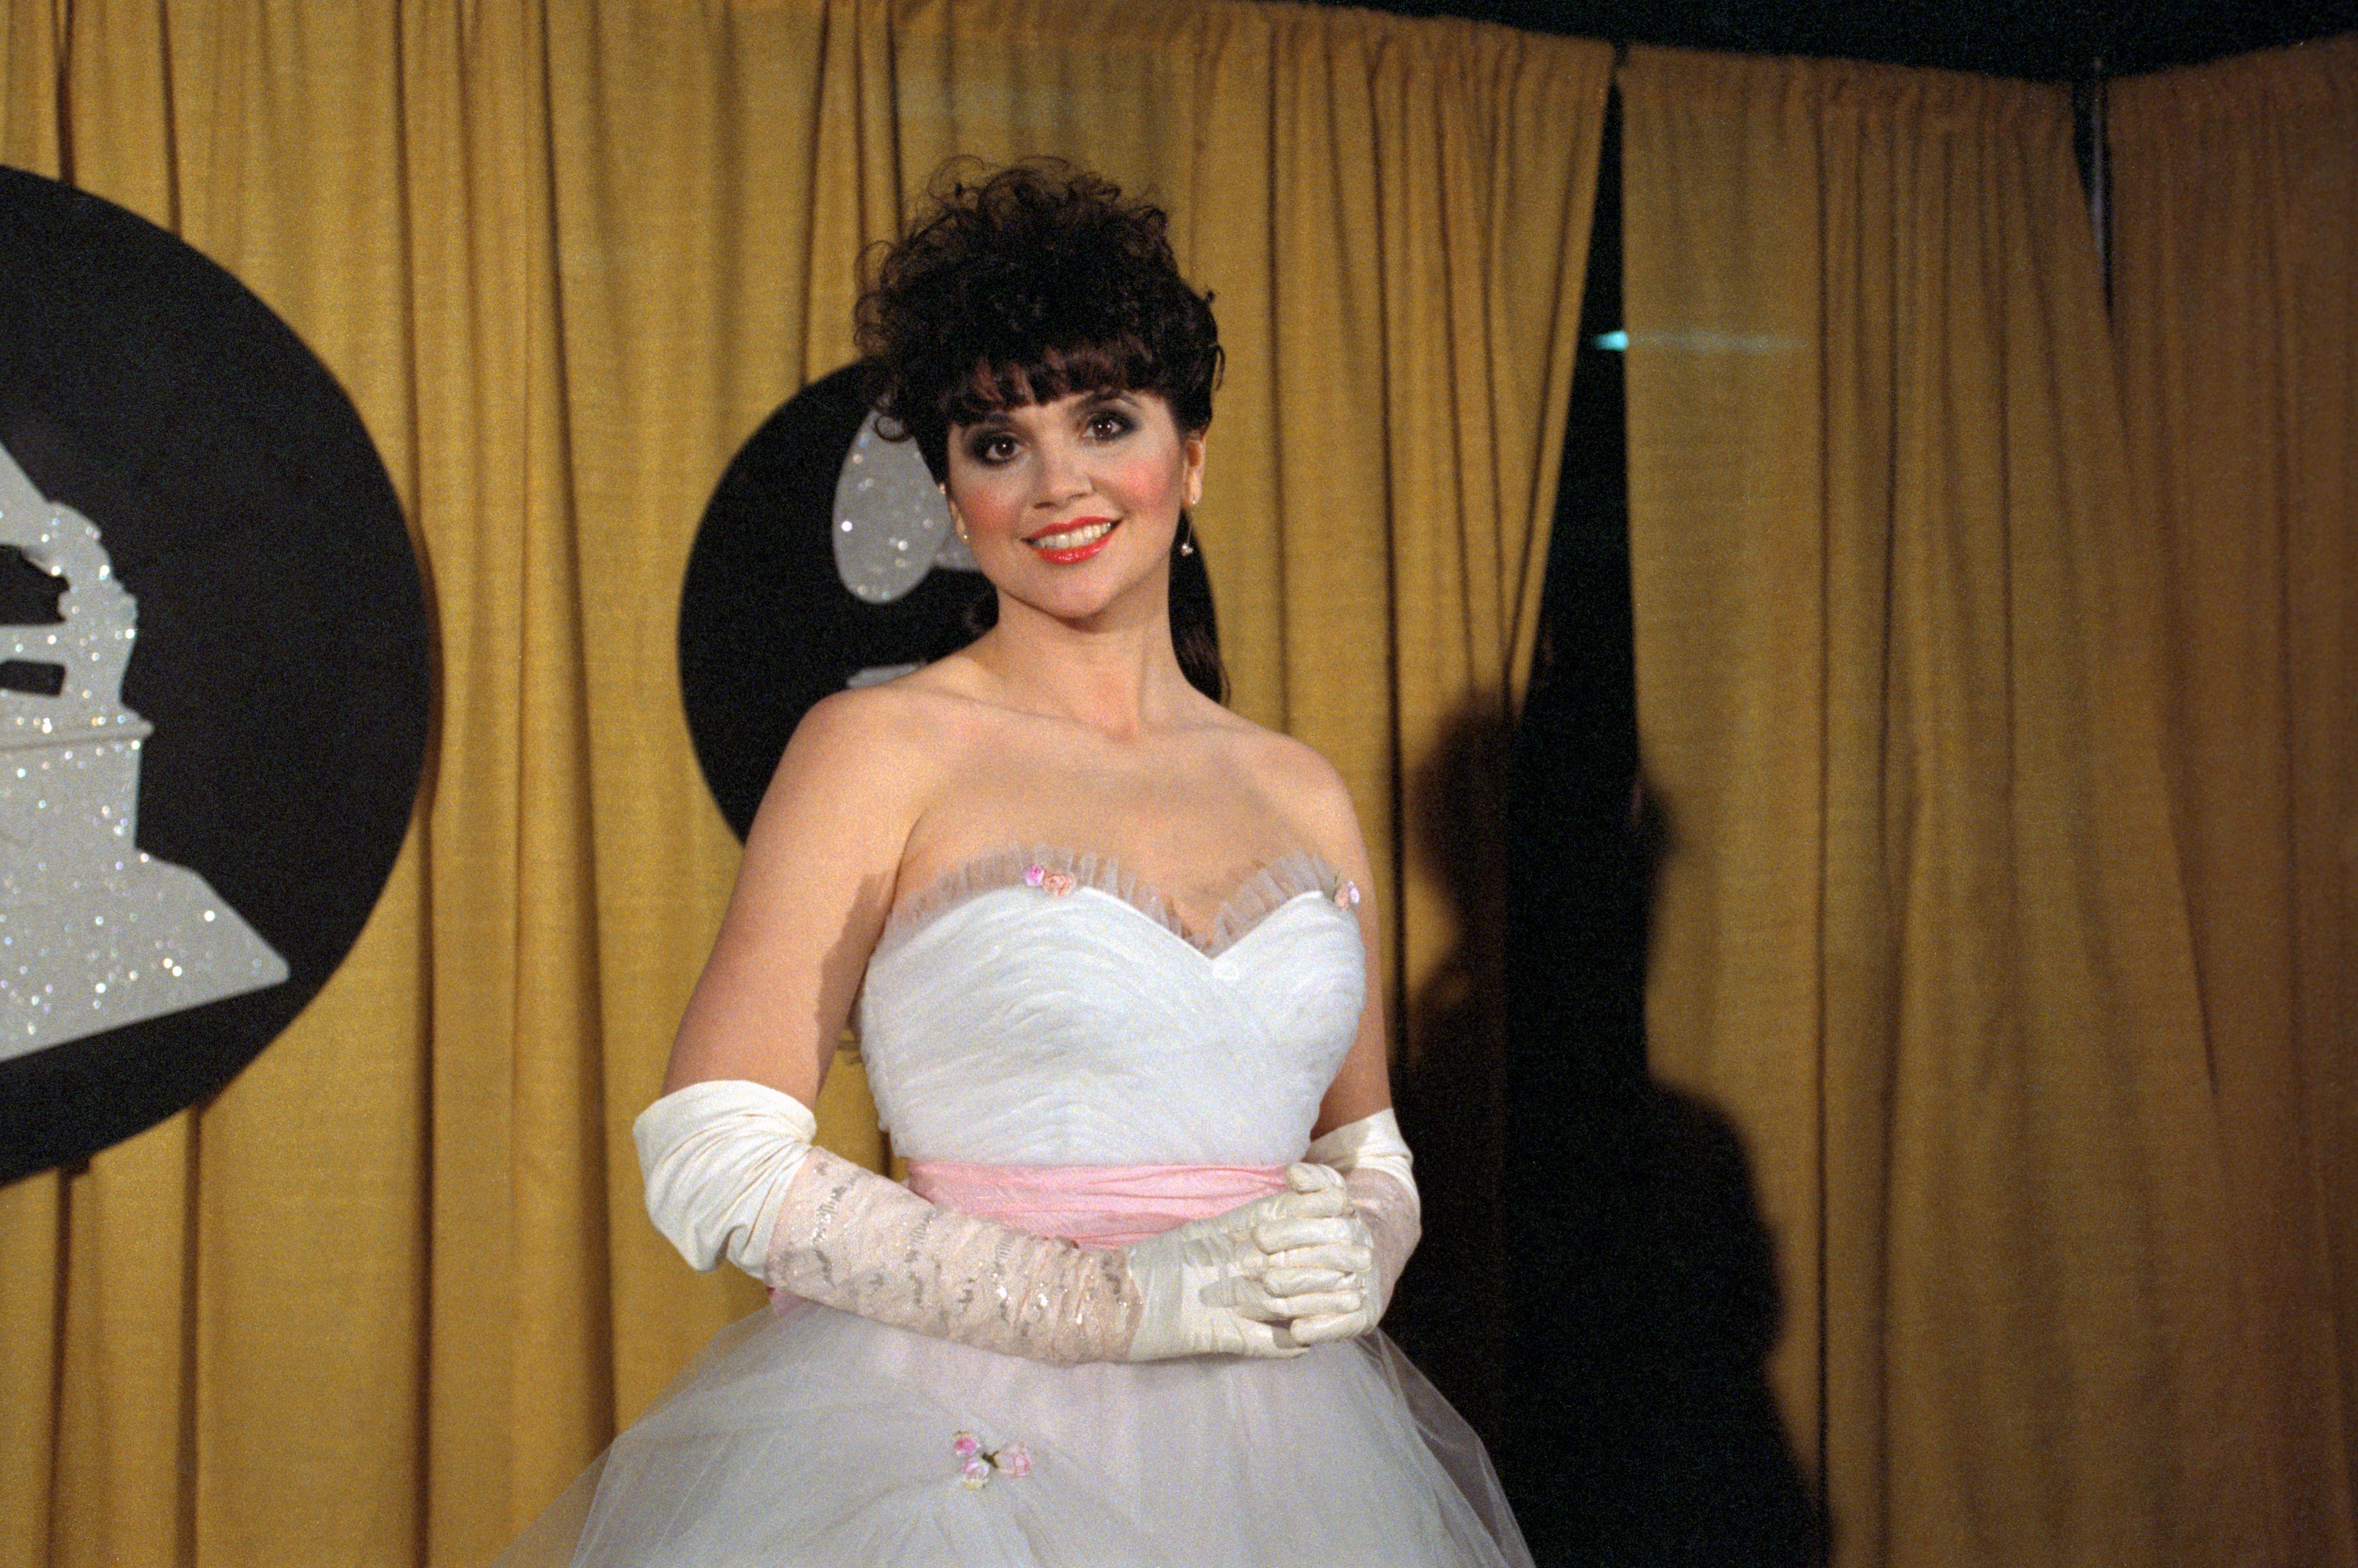 Linda Ronstadt posing in a white gown at Grammy Awards on February 28, 1984.┃Source: Getty Images